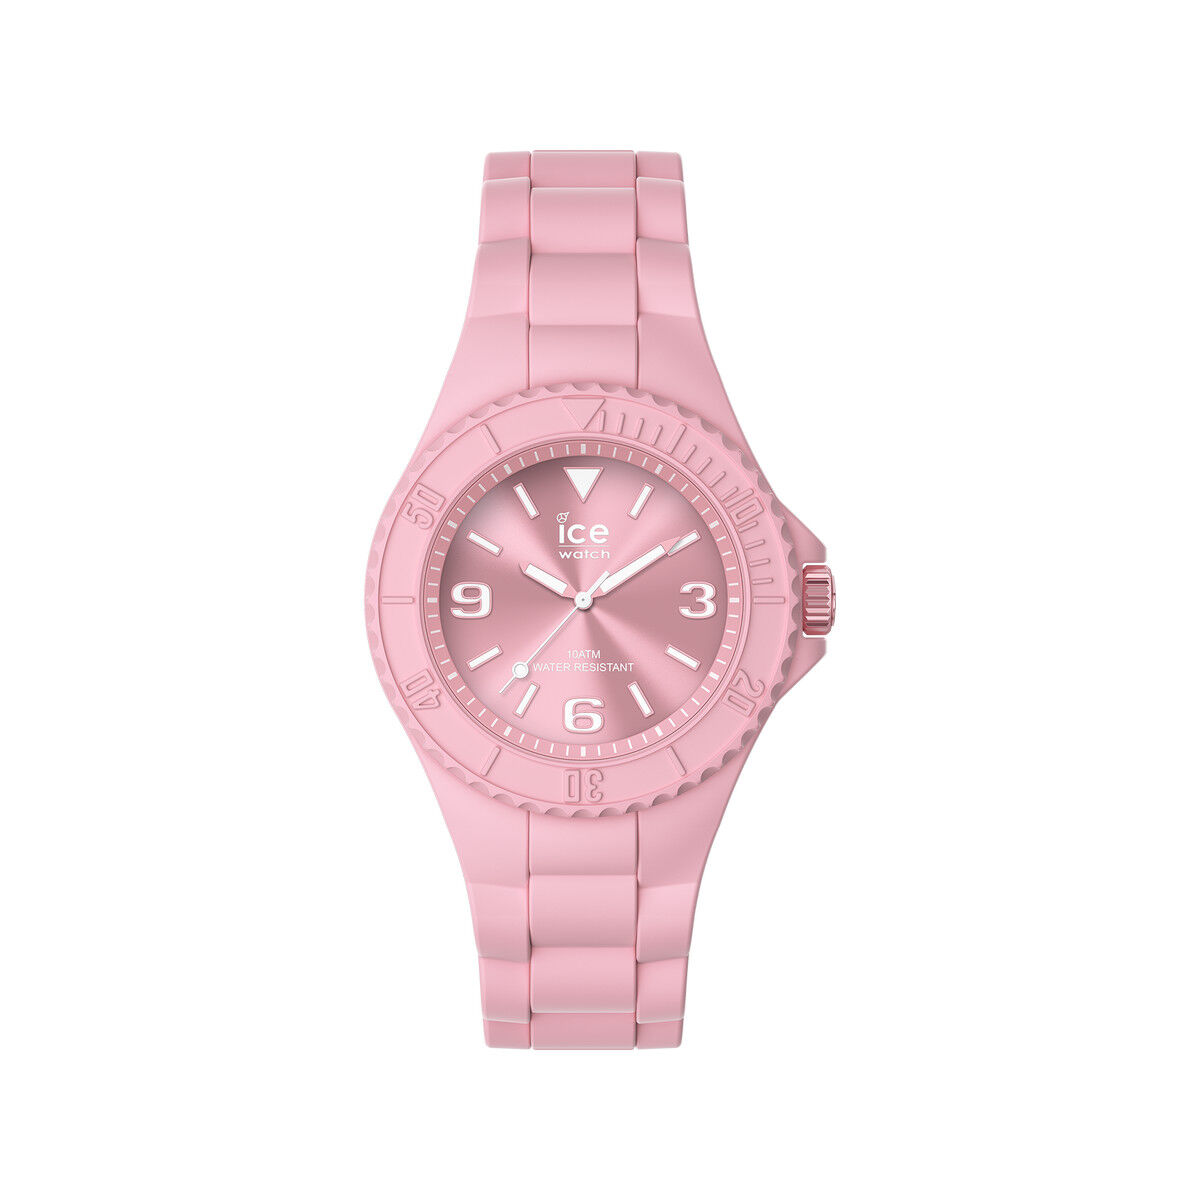 Ice-Watch ICE WATCH Montre Ice Watch small femme plastique silicone rose- MATY